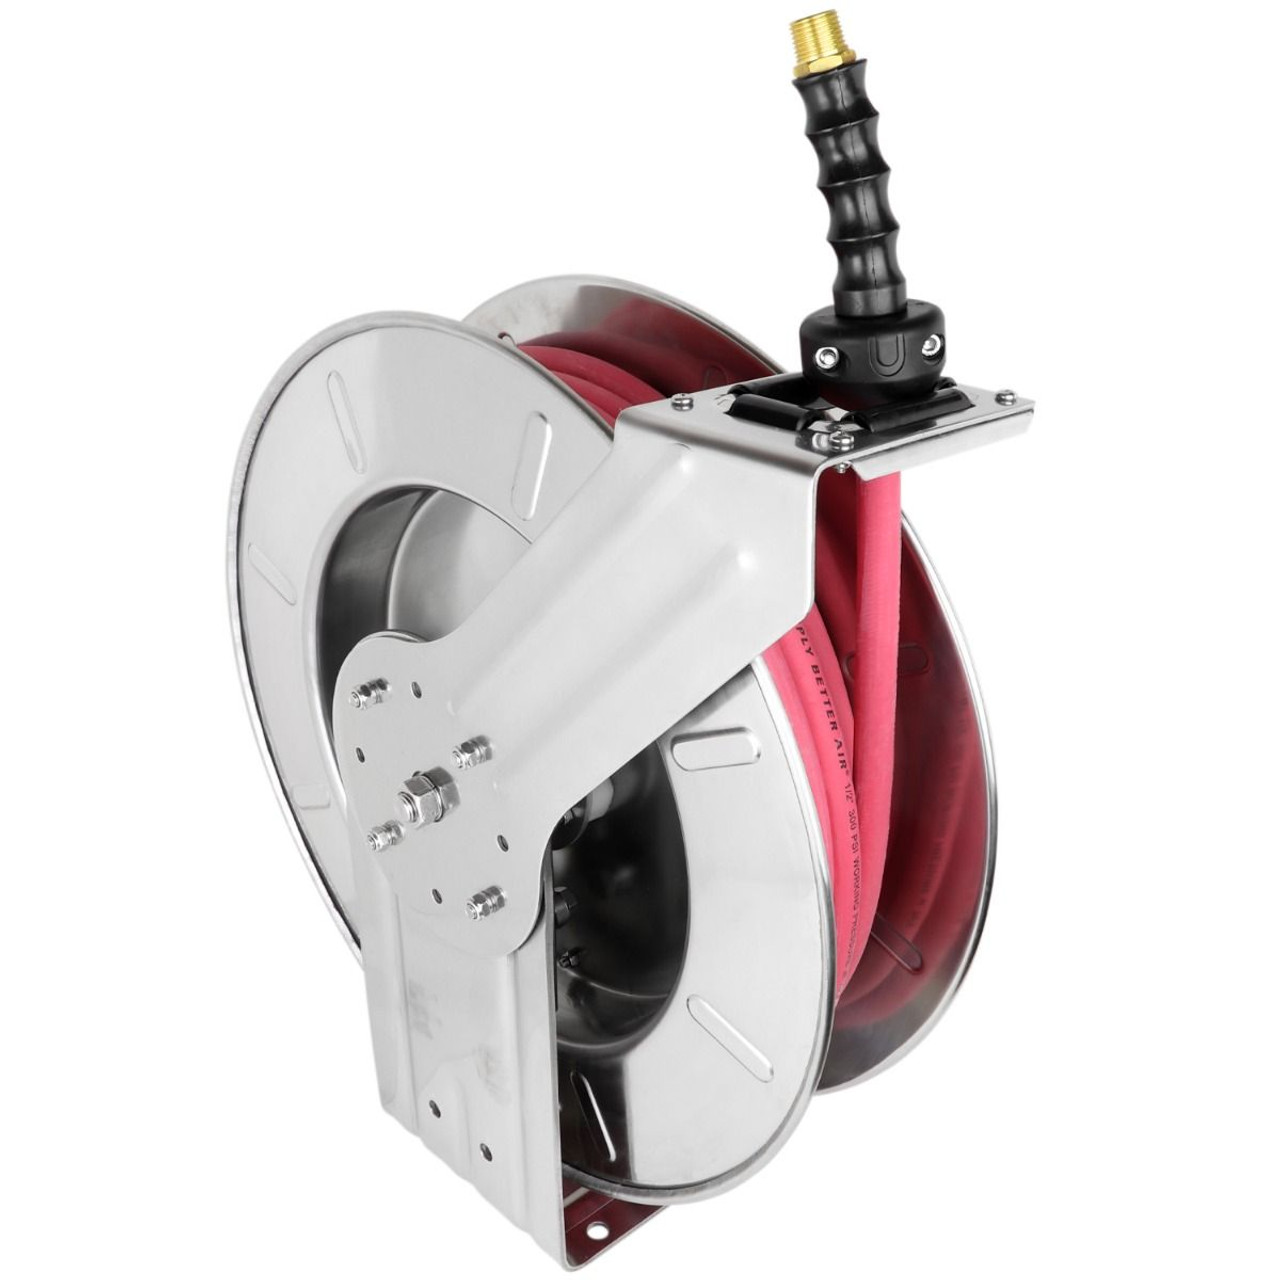 Milton? Industrial Stainless Steel Hose Reel Retractable, 1/2" ID x 25' Ultra-Lightweight Rubber hose w/ 3/8" NPT, 300 PSI